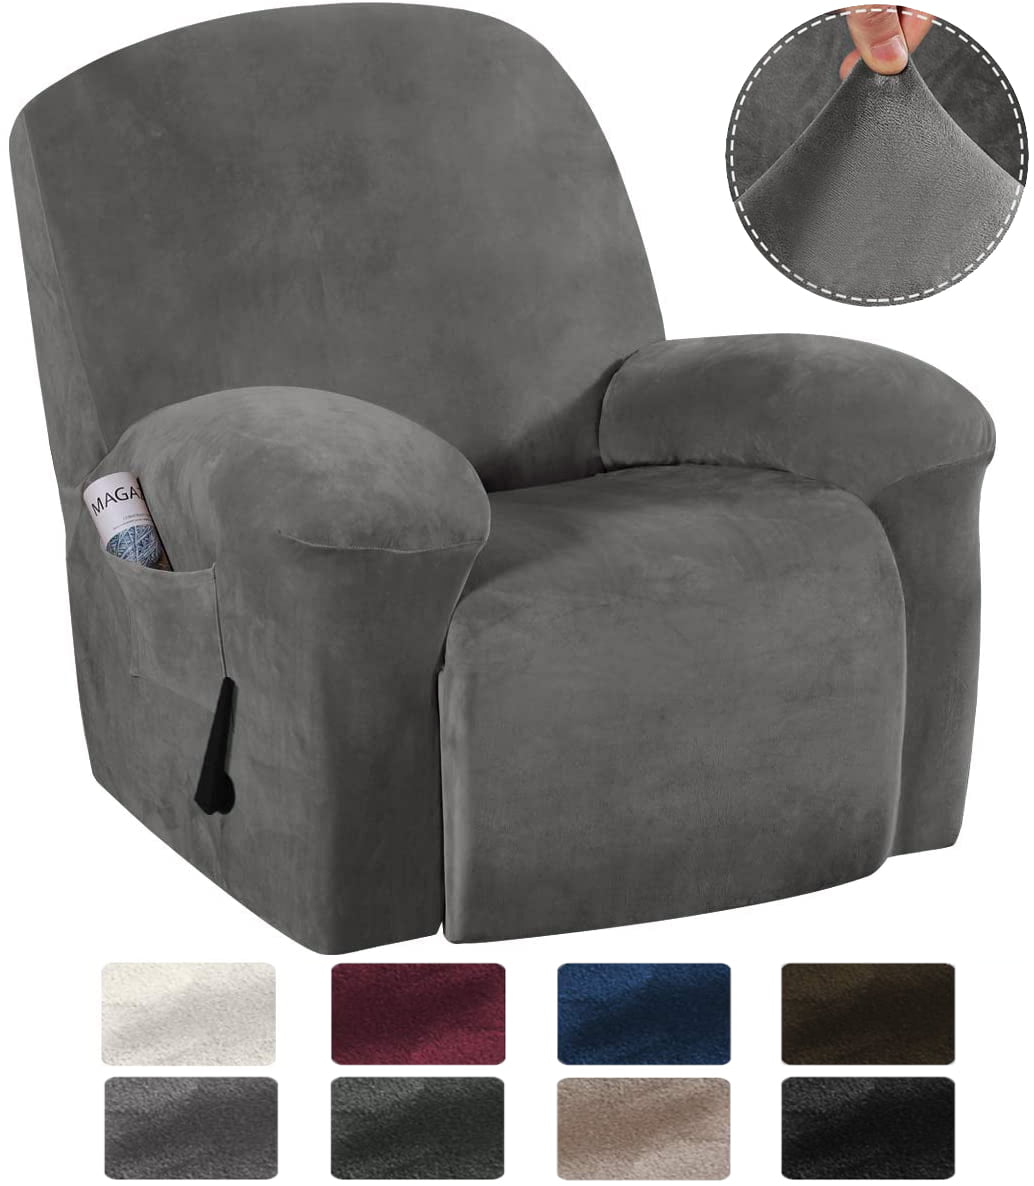 Recliner Chair Cover with Side Pocket,09 Recliner Slipcovers Furniture Protector Leather Recliner Elastic Bottom 6 Piece Stretch Velvet Plush Loveseat Recliner Cover Recliner Sofa Cover